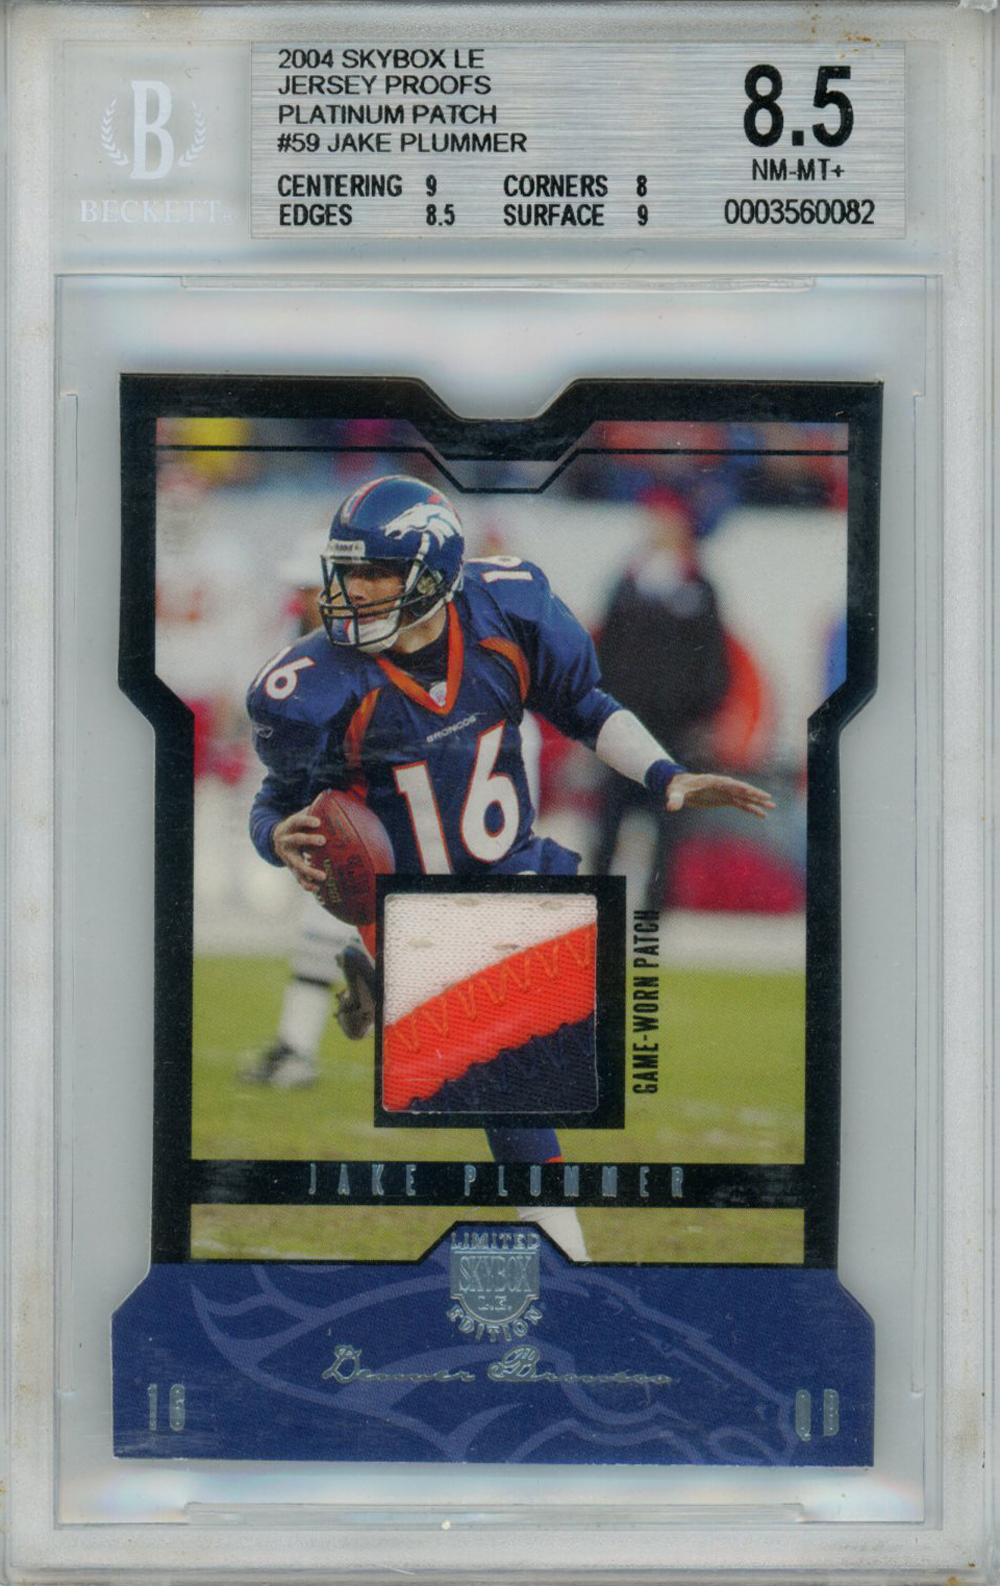 Jake Plummer 2004 Skybox LE Jersey Proofs Platinum Patch Trading Card